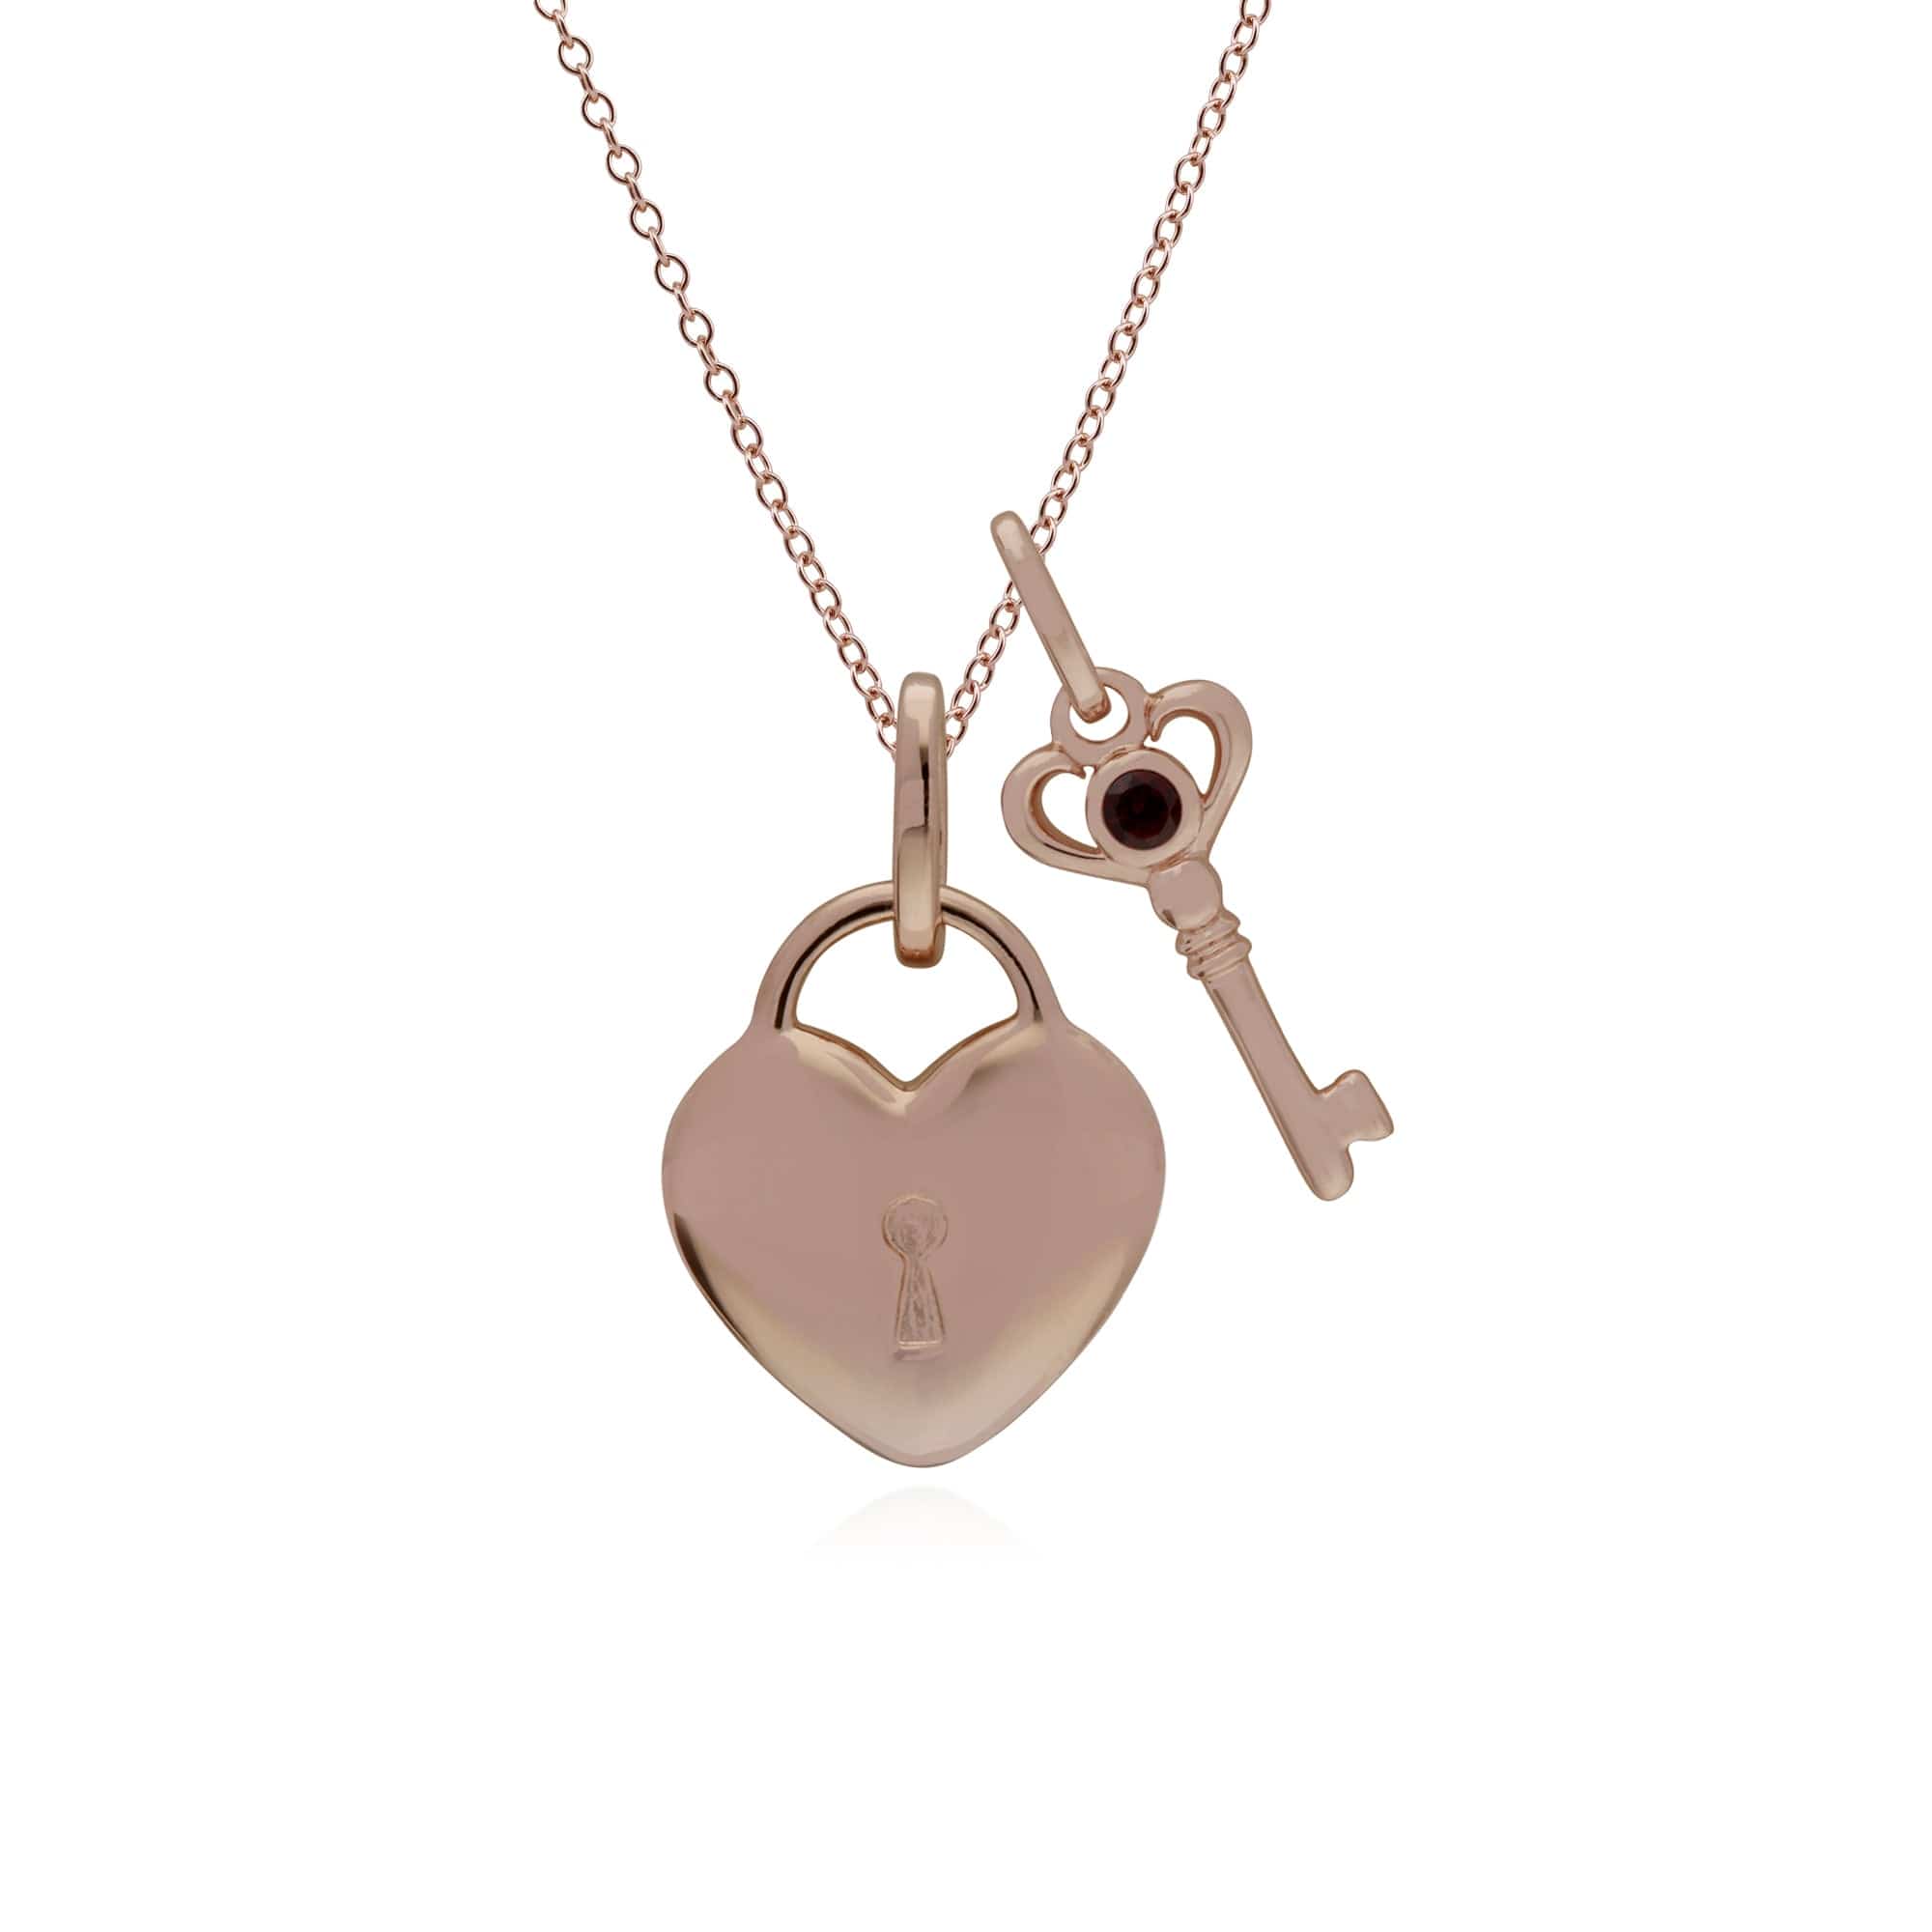 270P026306925-270P026901925 Classic Heart Lock Pendant & Garnet Key Charm in Rose Gold Plated 925 Sterling Silver 1